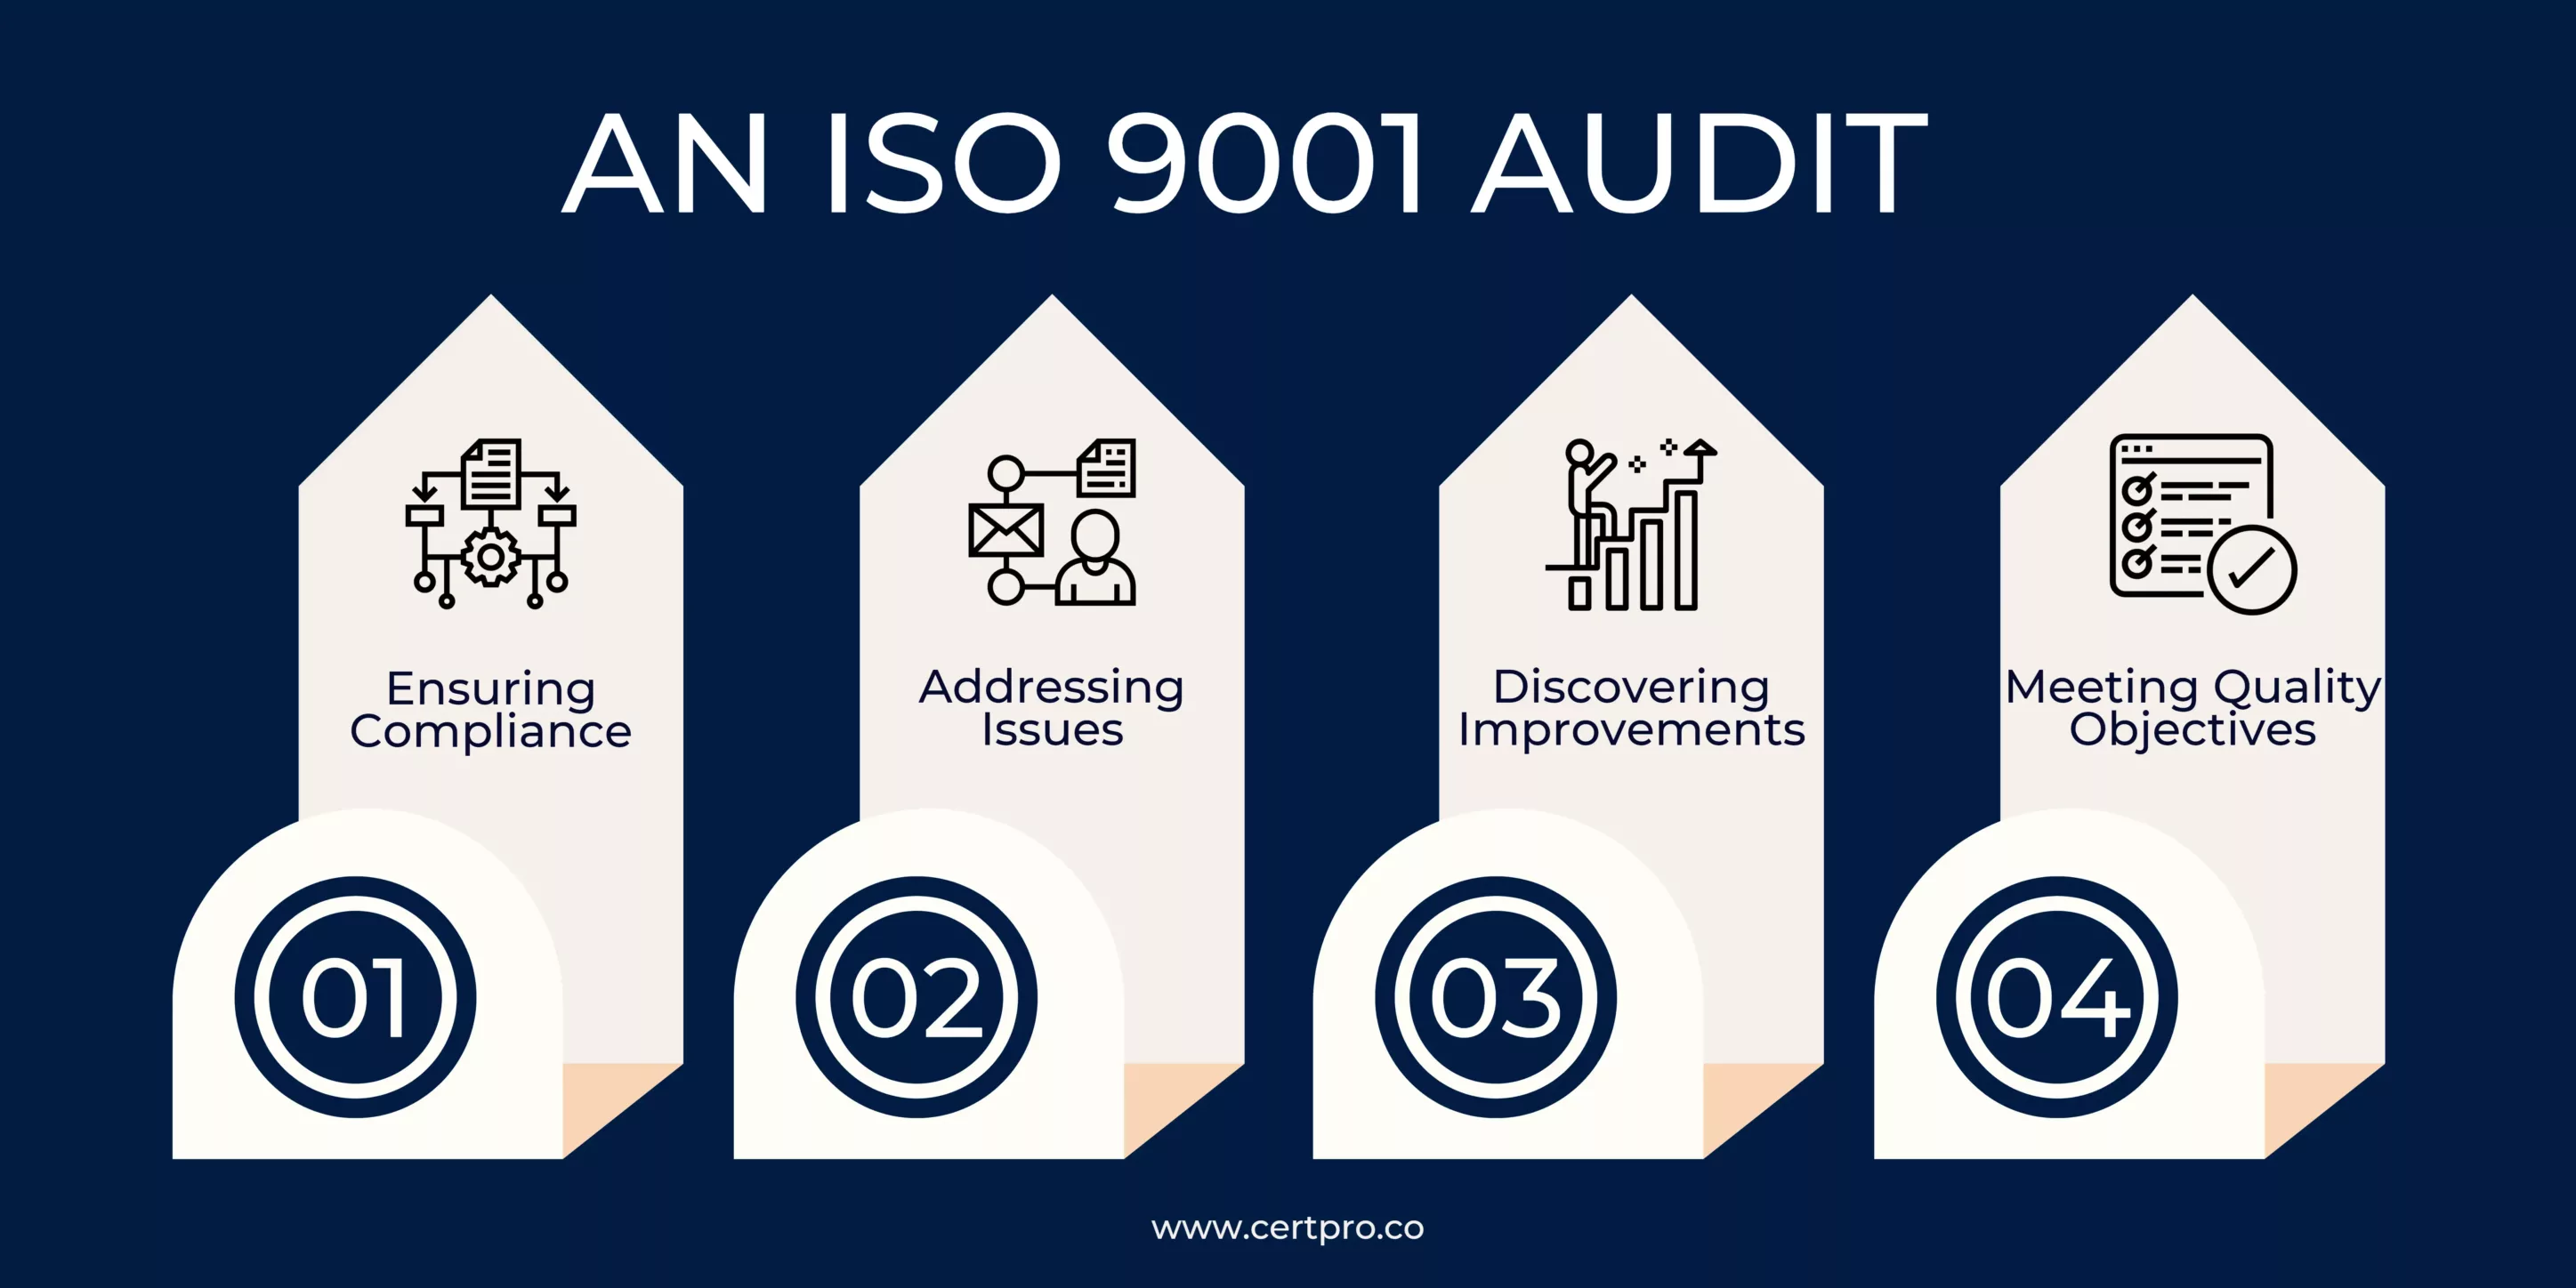 AN ISO 9001 AUDIT